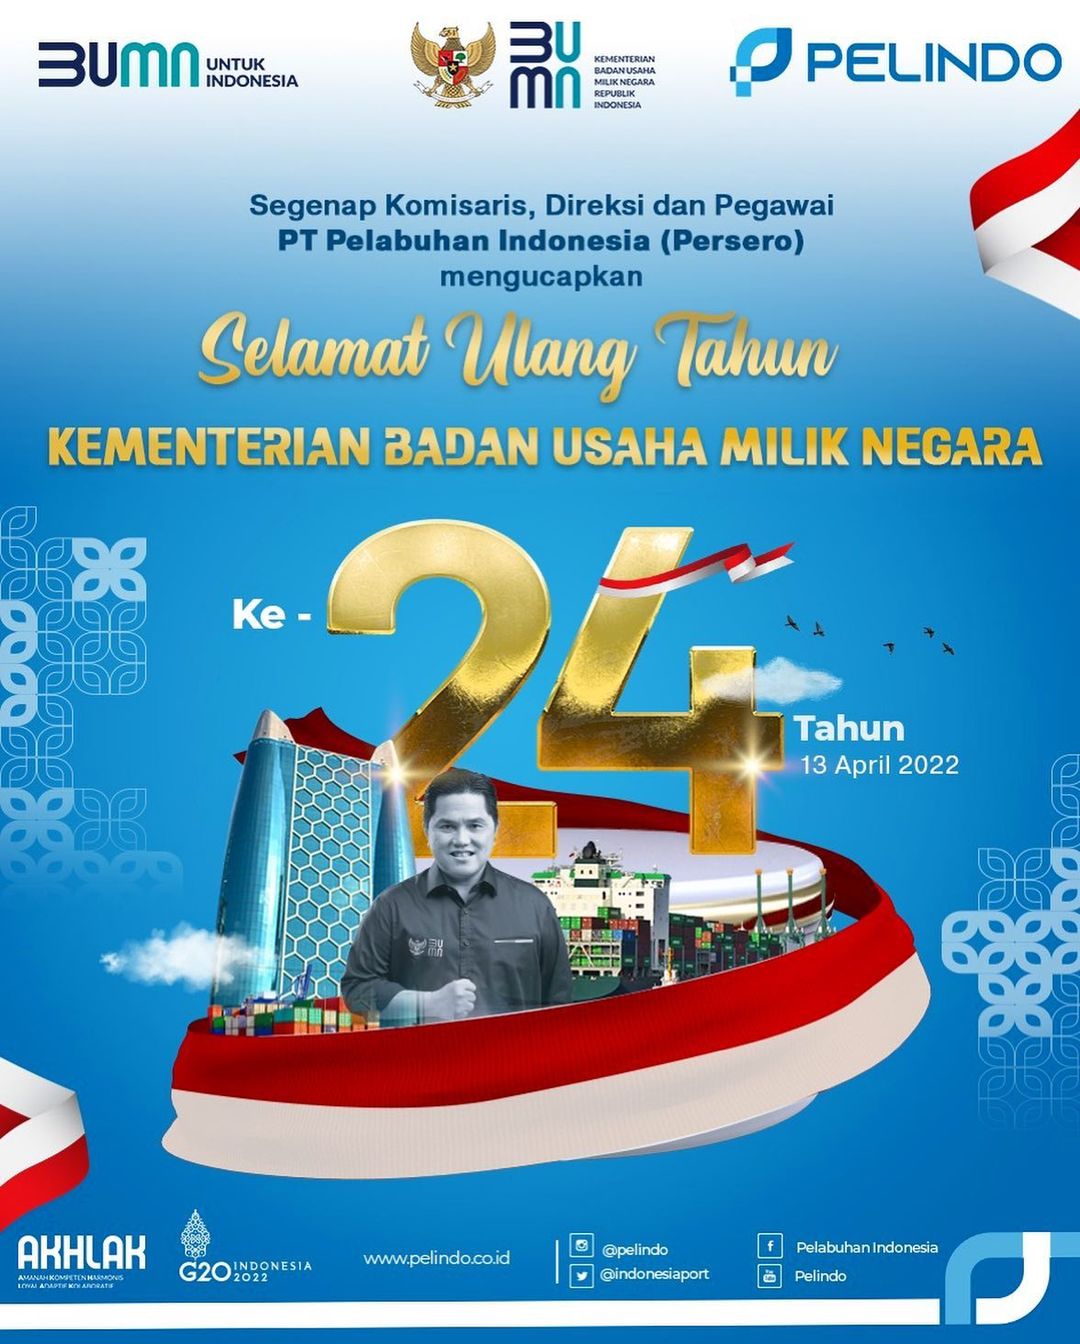 24th Anniversary of the BUMN Ministry